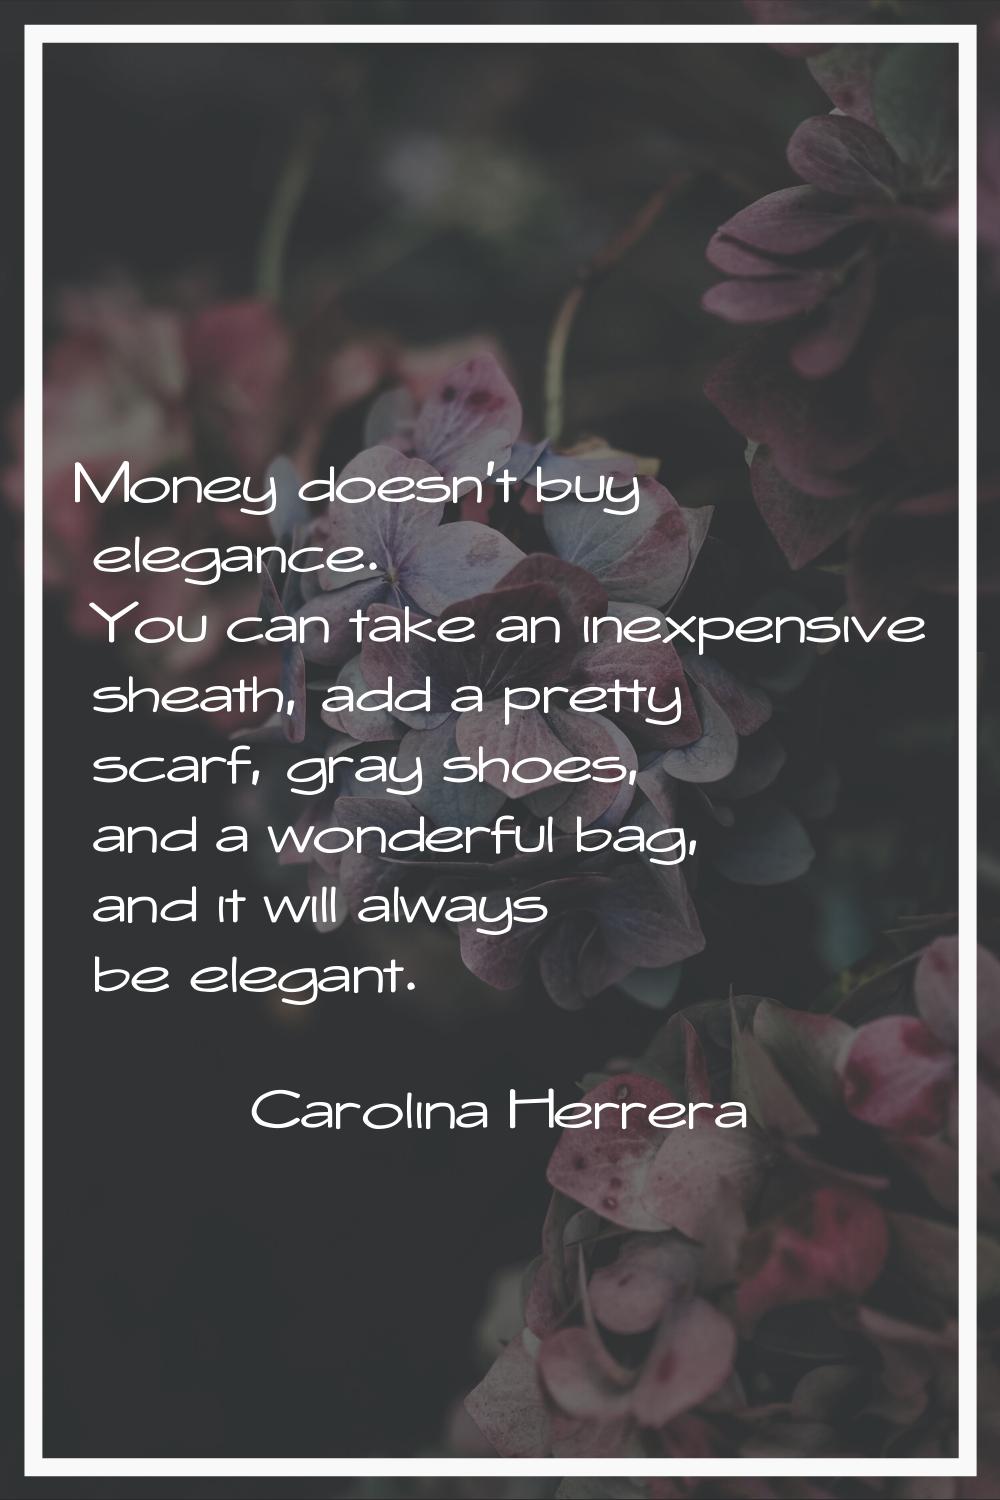 Money doesn't buy elegance. You can take an inexpensive sheath, add a pretty scarf, gray shoes, and